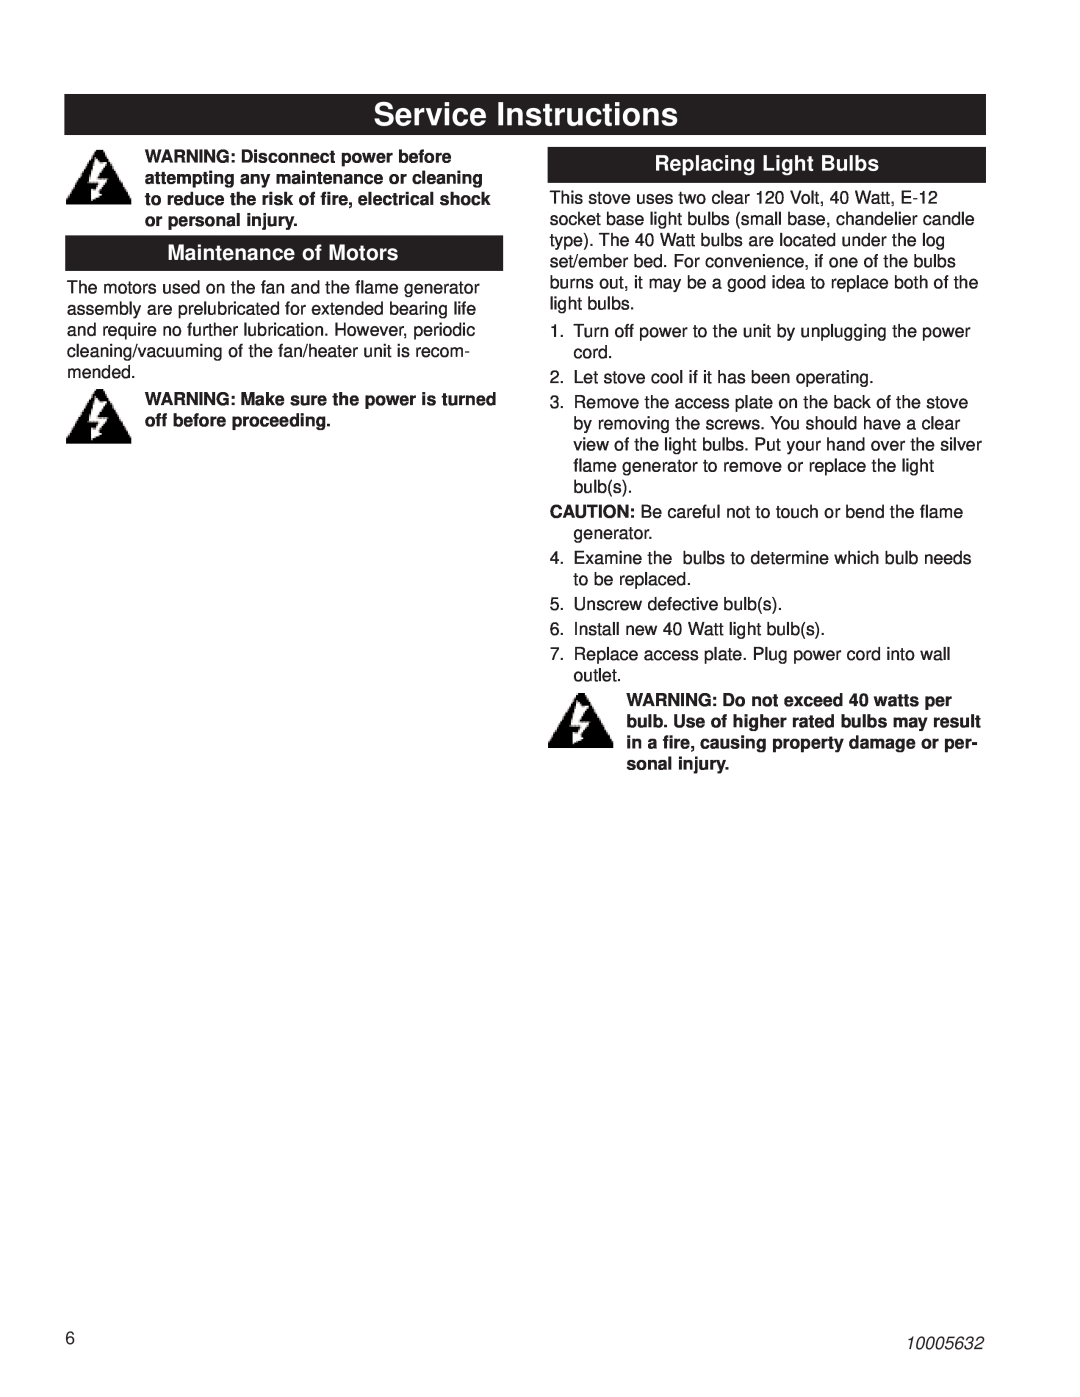 Kenwood HES20 installation instructions Service Instructions, Maintenance of Motors, Replacing Light Bulbs, 10005632 